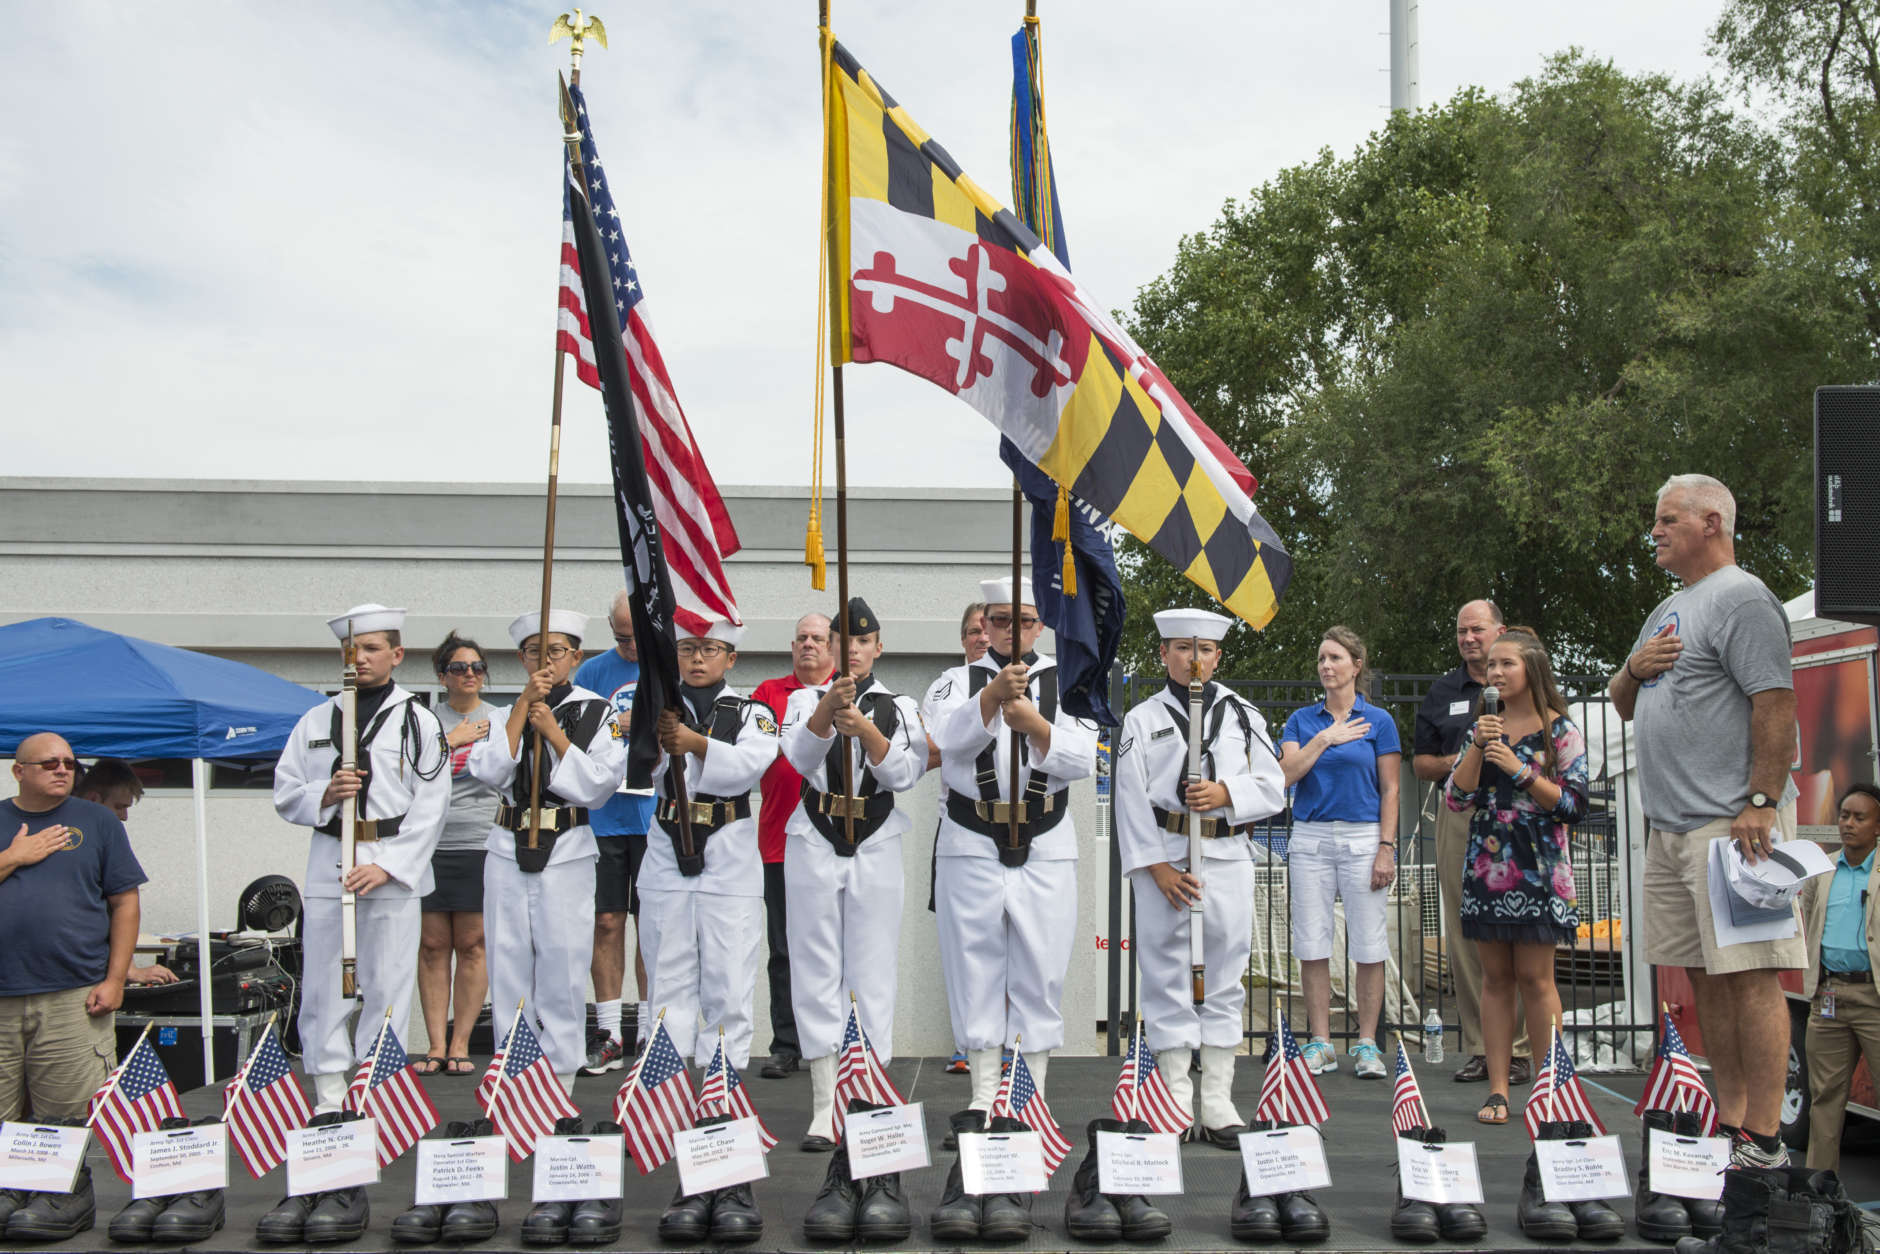 The US NavyLeague Cadet Corps Color Guard presides over the National Anthem during the opening ceremony for the 2016 9/11 Heroes Run in Annapolis. (Courtesy, Harrison Hart)